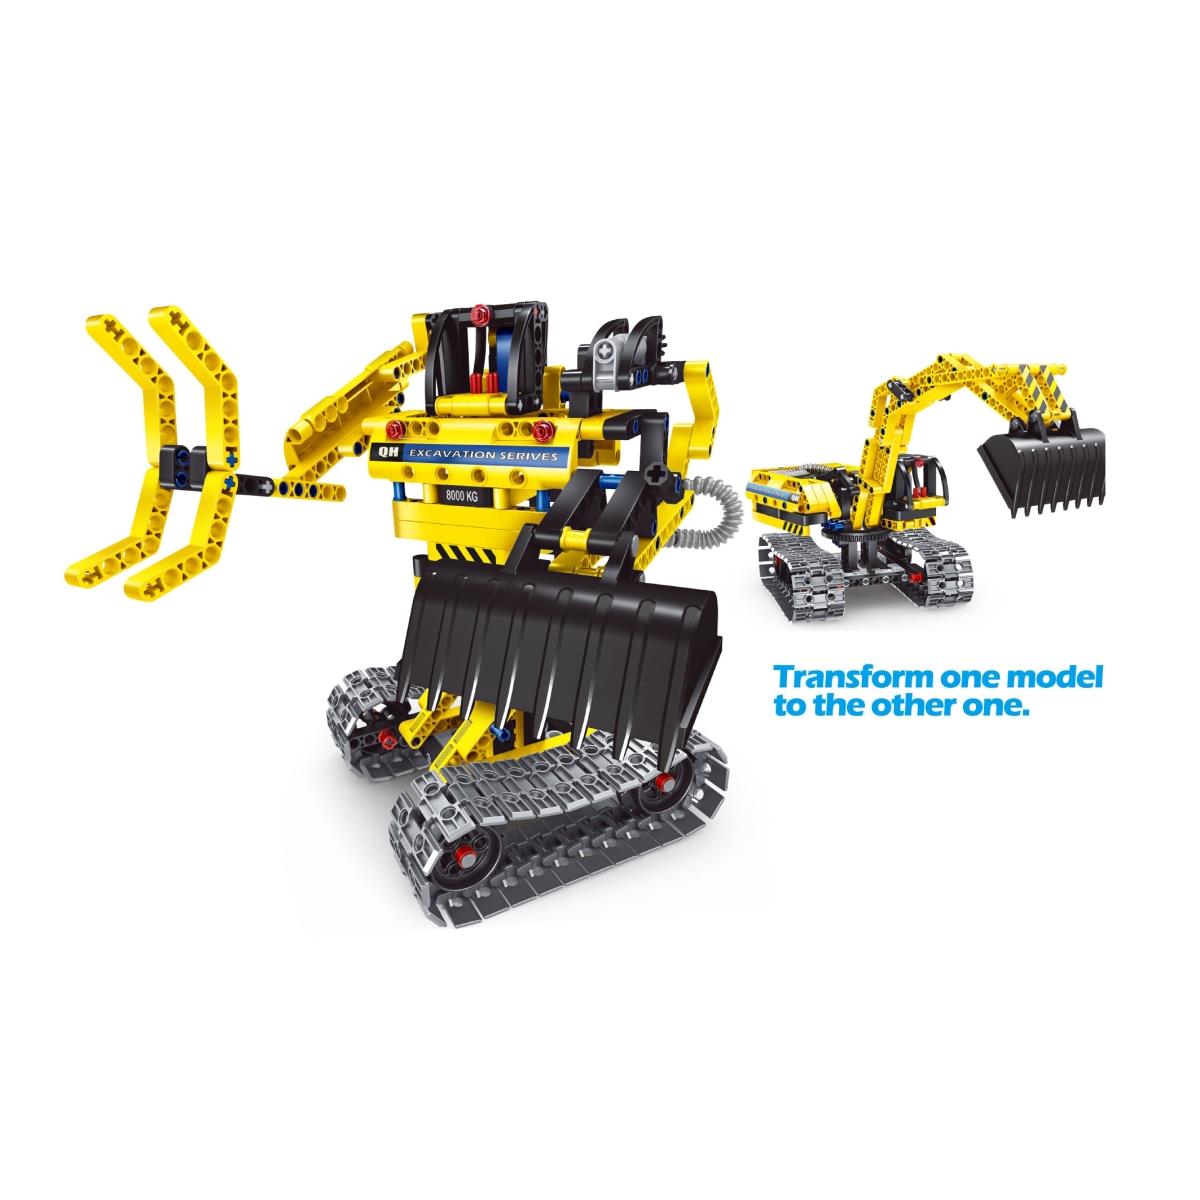 Picture of AZ Trading & Import PS6801 Mechanical Master Excavator 2 in 1 Engineering Toy Brick for Boys